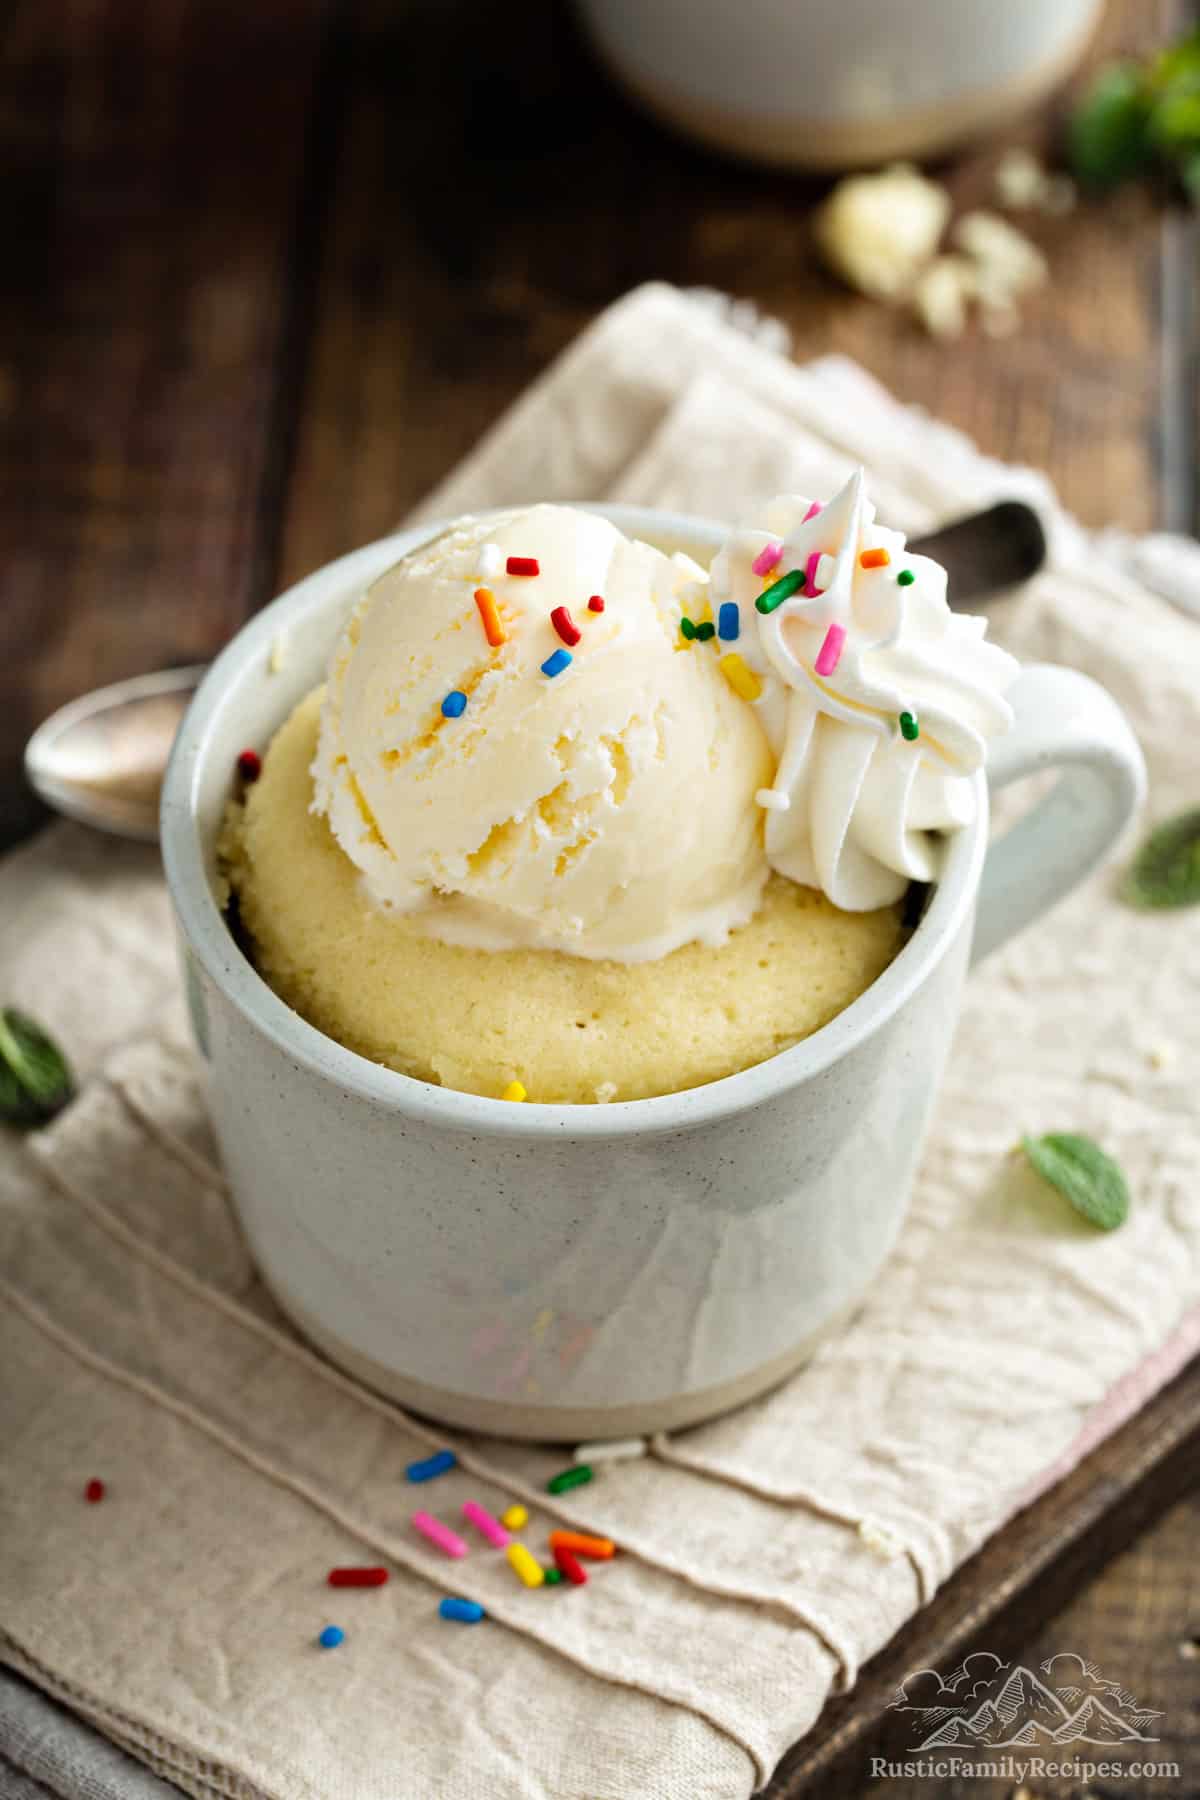 A vanilla cake in a mug topped with ice cream, whipped cream and sprinkles.